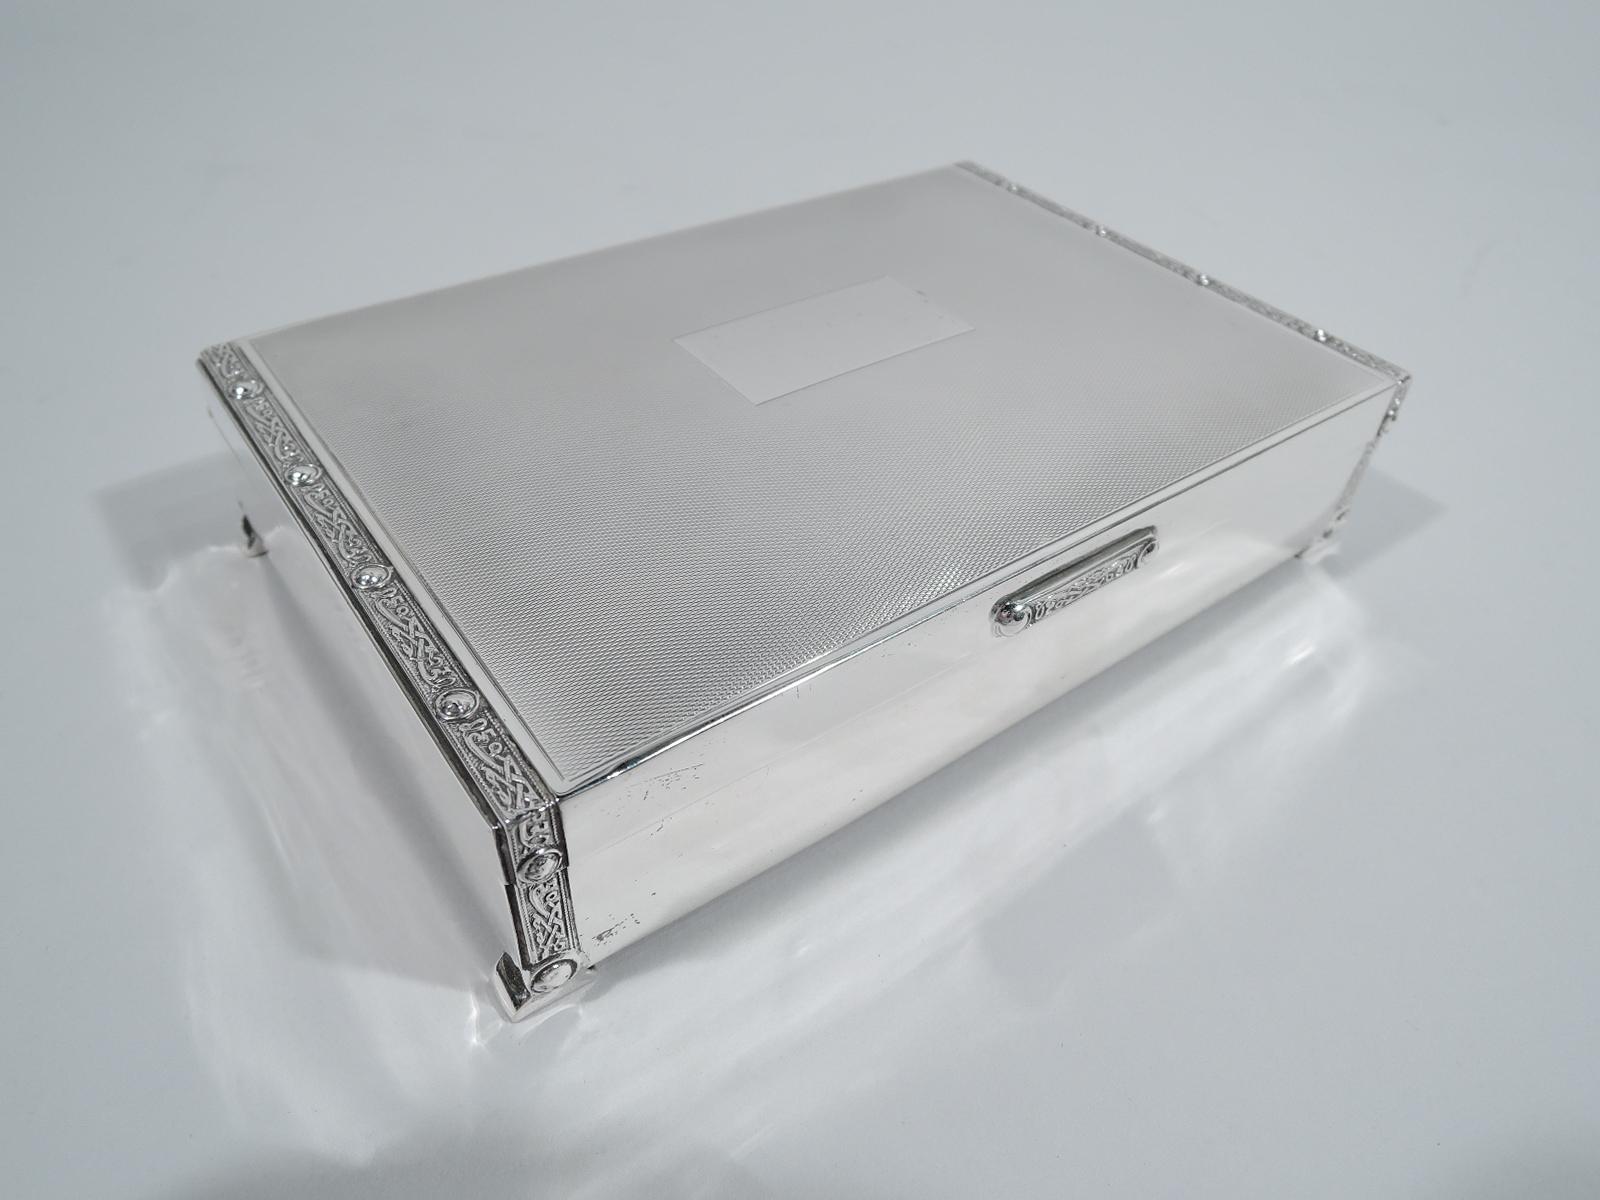 George VI sterling silver box. Made by Charles S. Green & Co. Ltd in Birmingham in 1951. Rectangular with plain and straight sides and bracket supports. Cover hinged; top has central rectangle (vacant) surrounded by engine-turned ornament. At ends